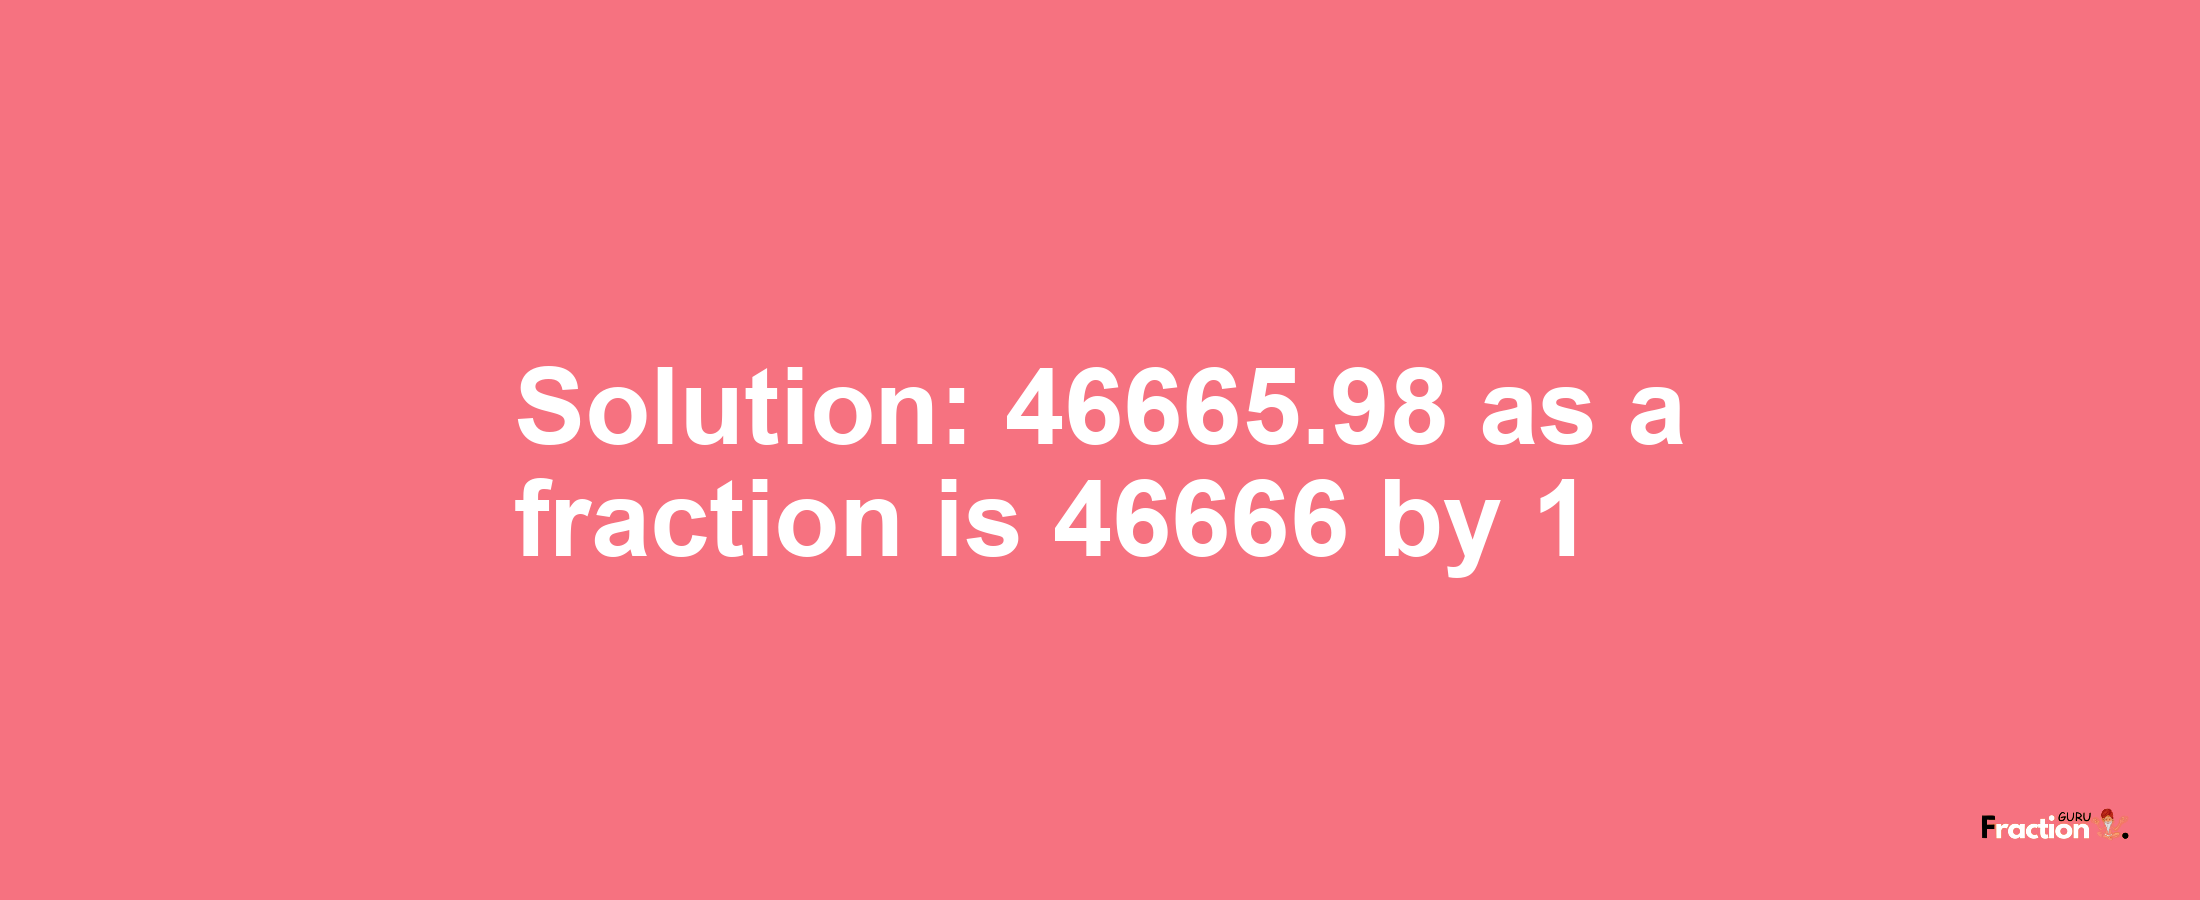 Solution:46665.98 as a fraction is 46666/1